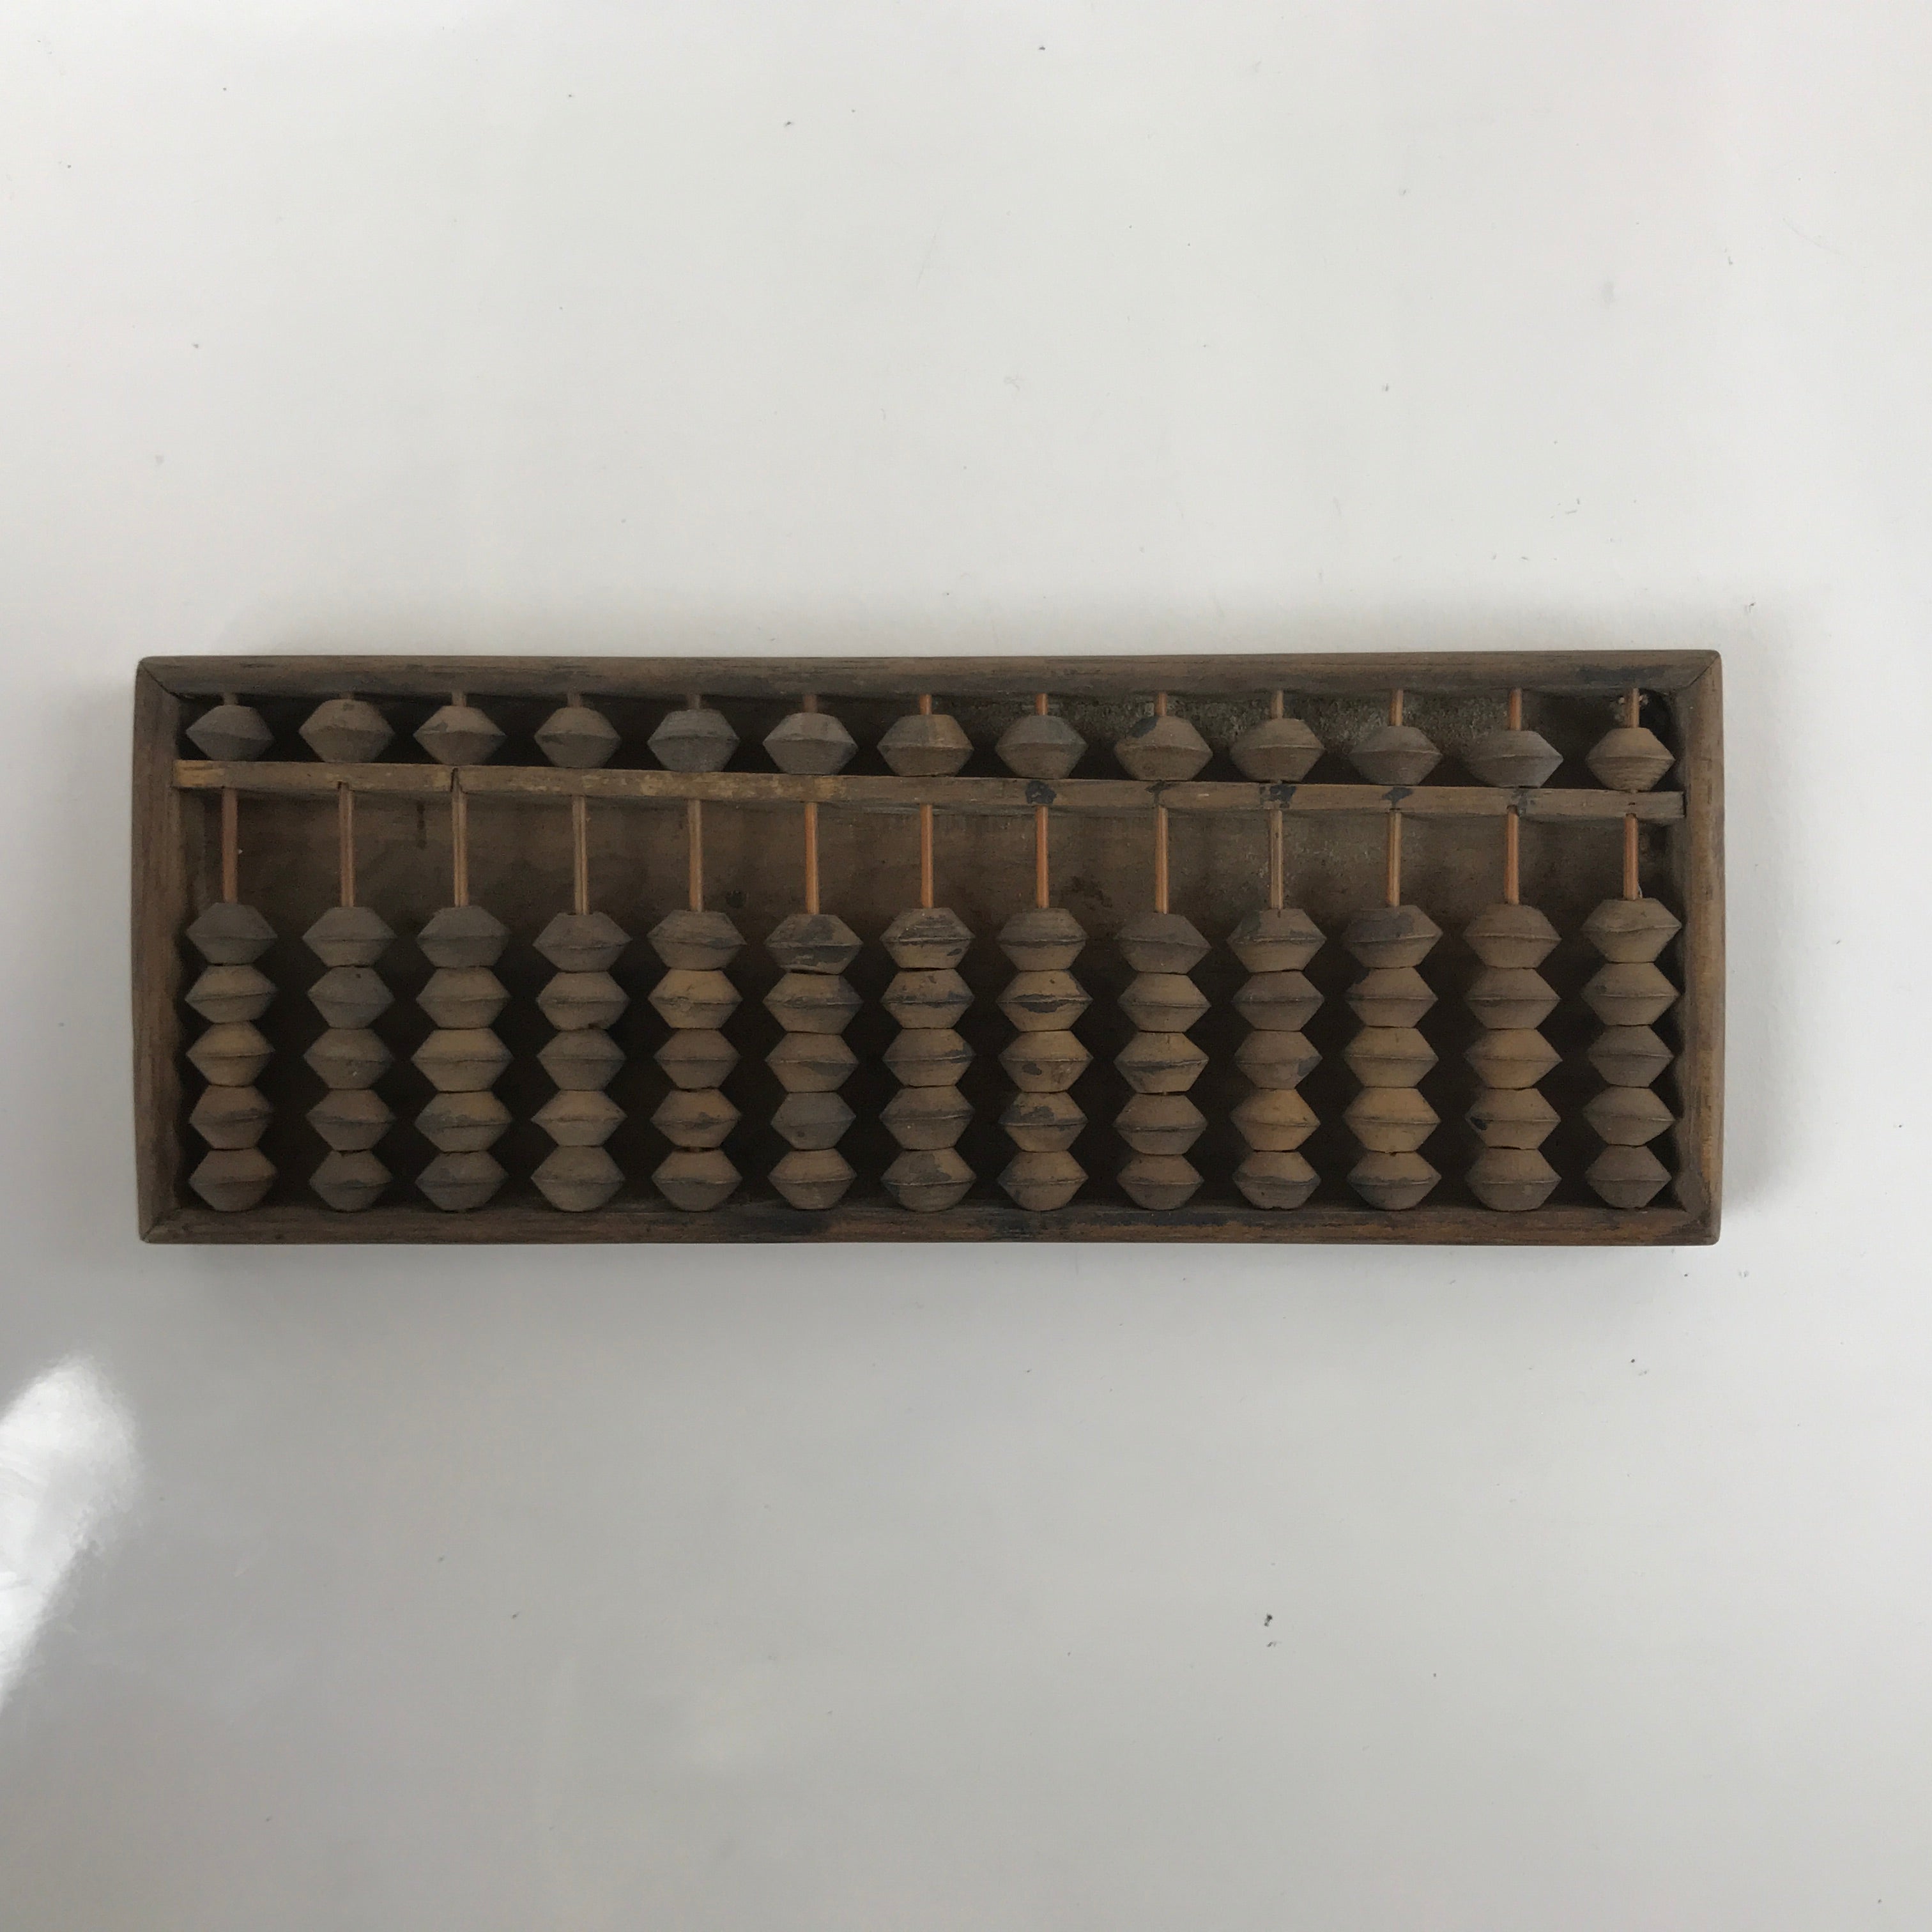 Japanese Wooden Abacus Soroban Math Calculating Tool Vtg 1/5 Beads 13 Rows ST64